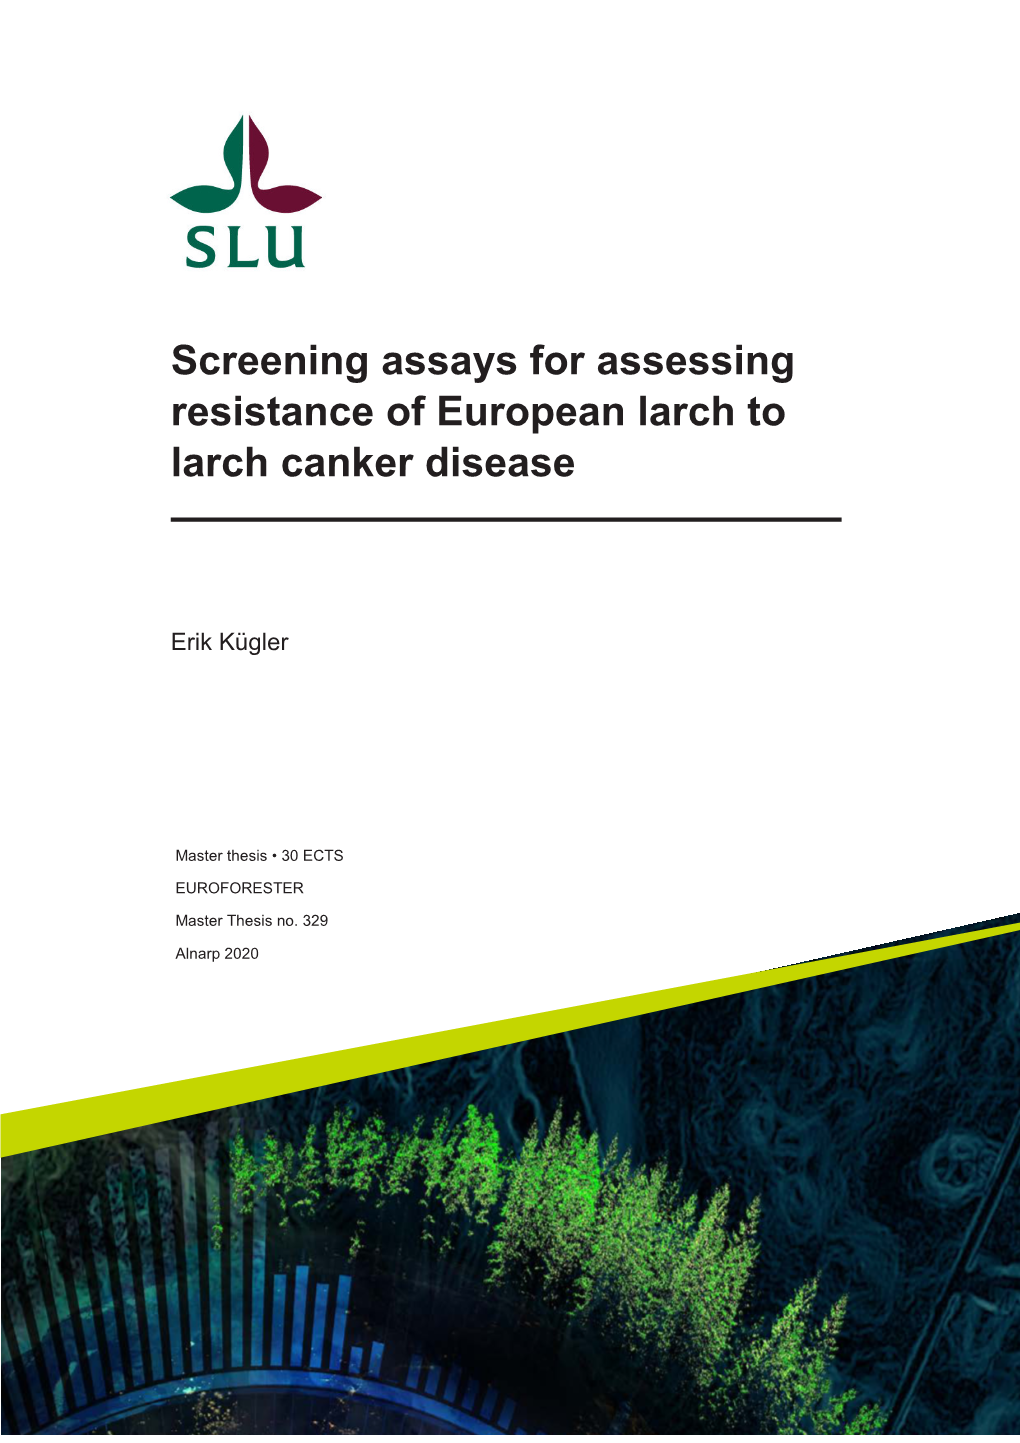 Screening Assays for Assessing Resistance of European Larch to Larch Canker Disease